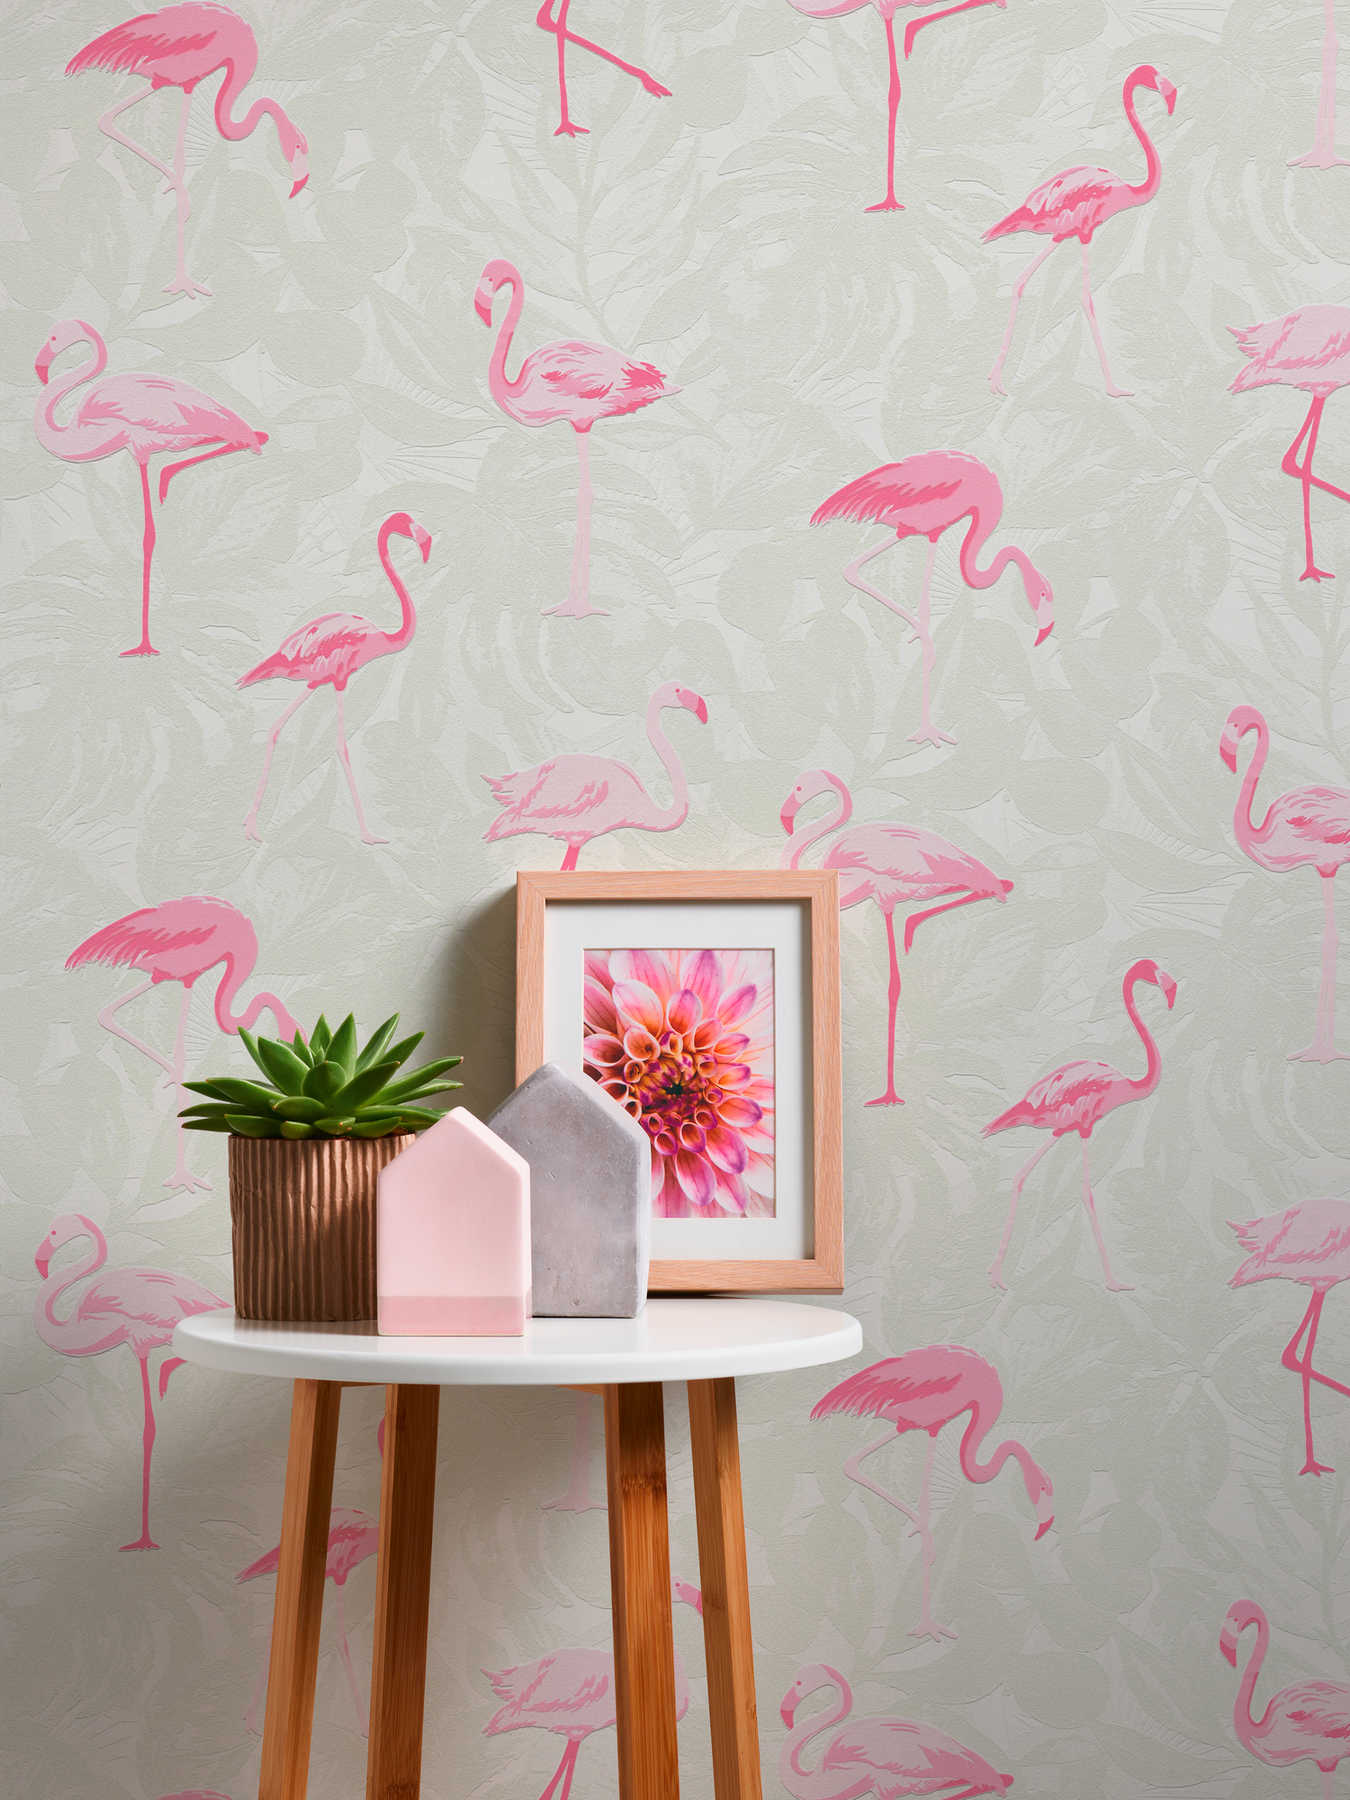             Flamingo wallpaper with tropical leaves - pink, cream
        